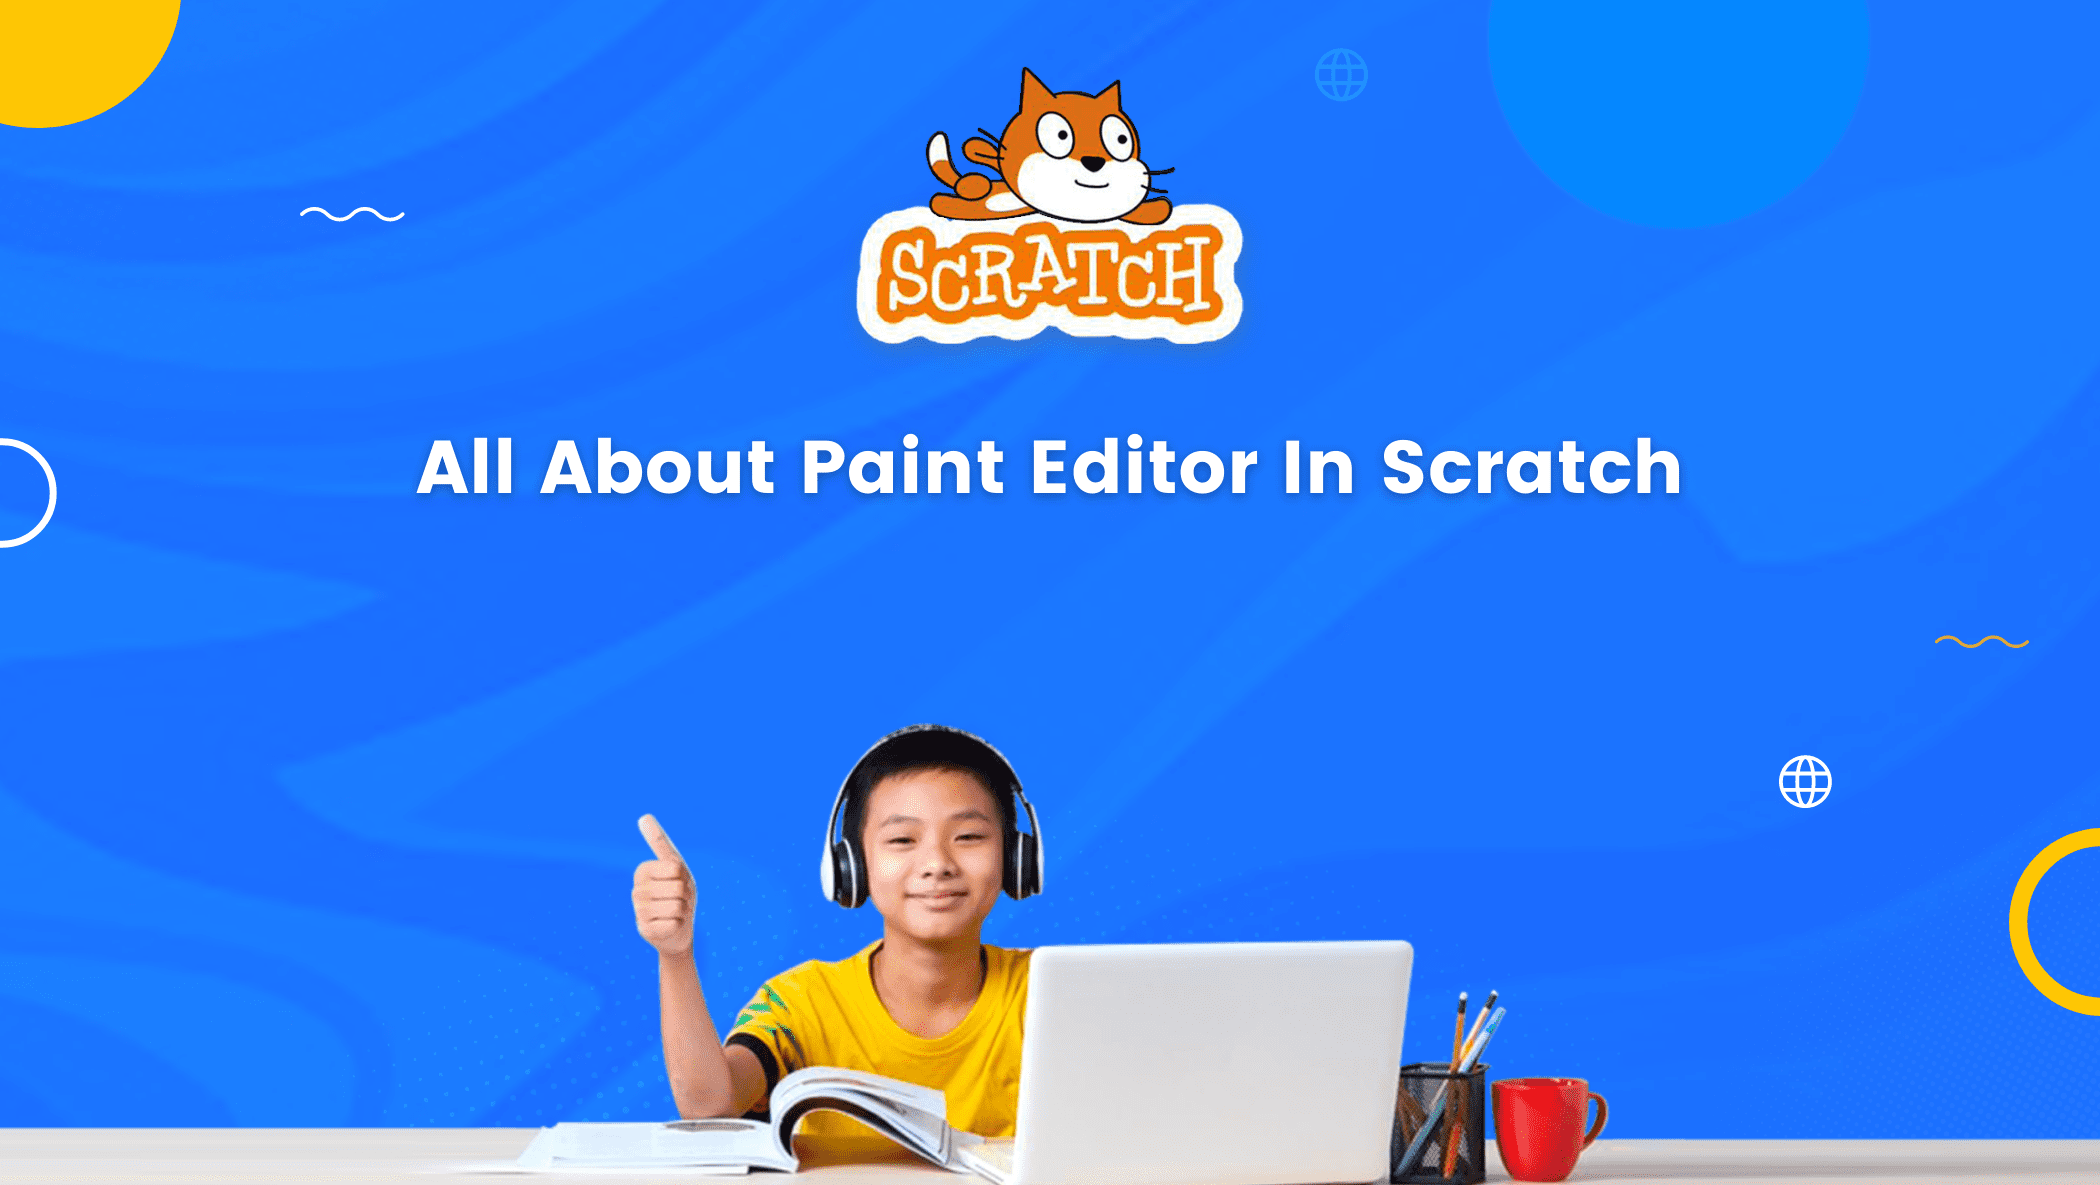 All About Paint Editor In Scratch